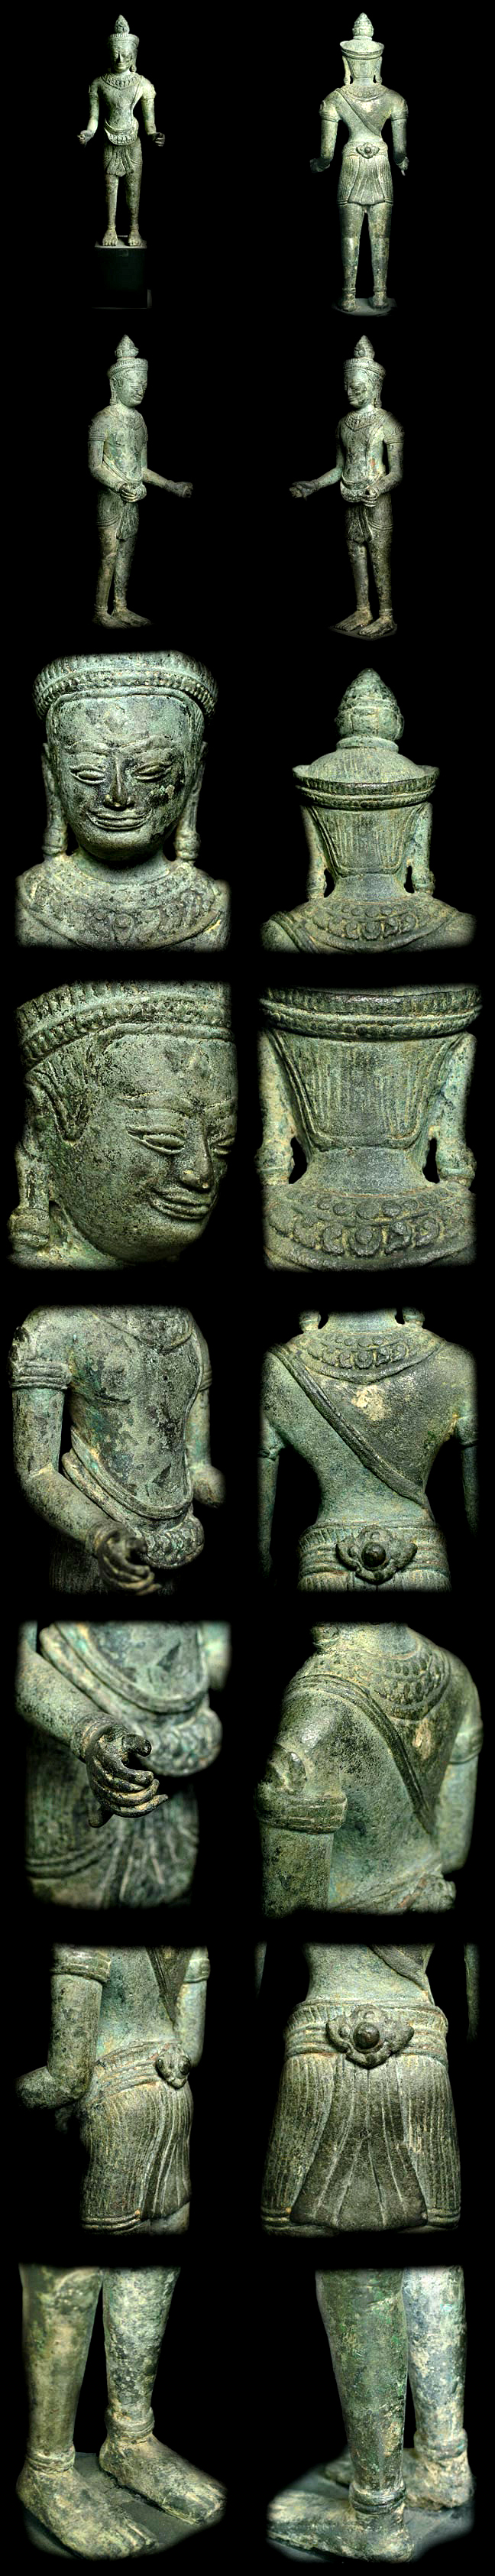 Extremely Rare 13C Khmer Siva Sculpture #Al.928